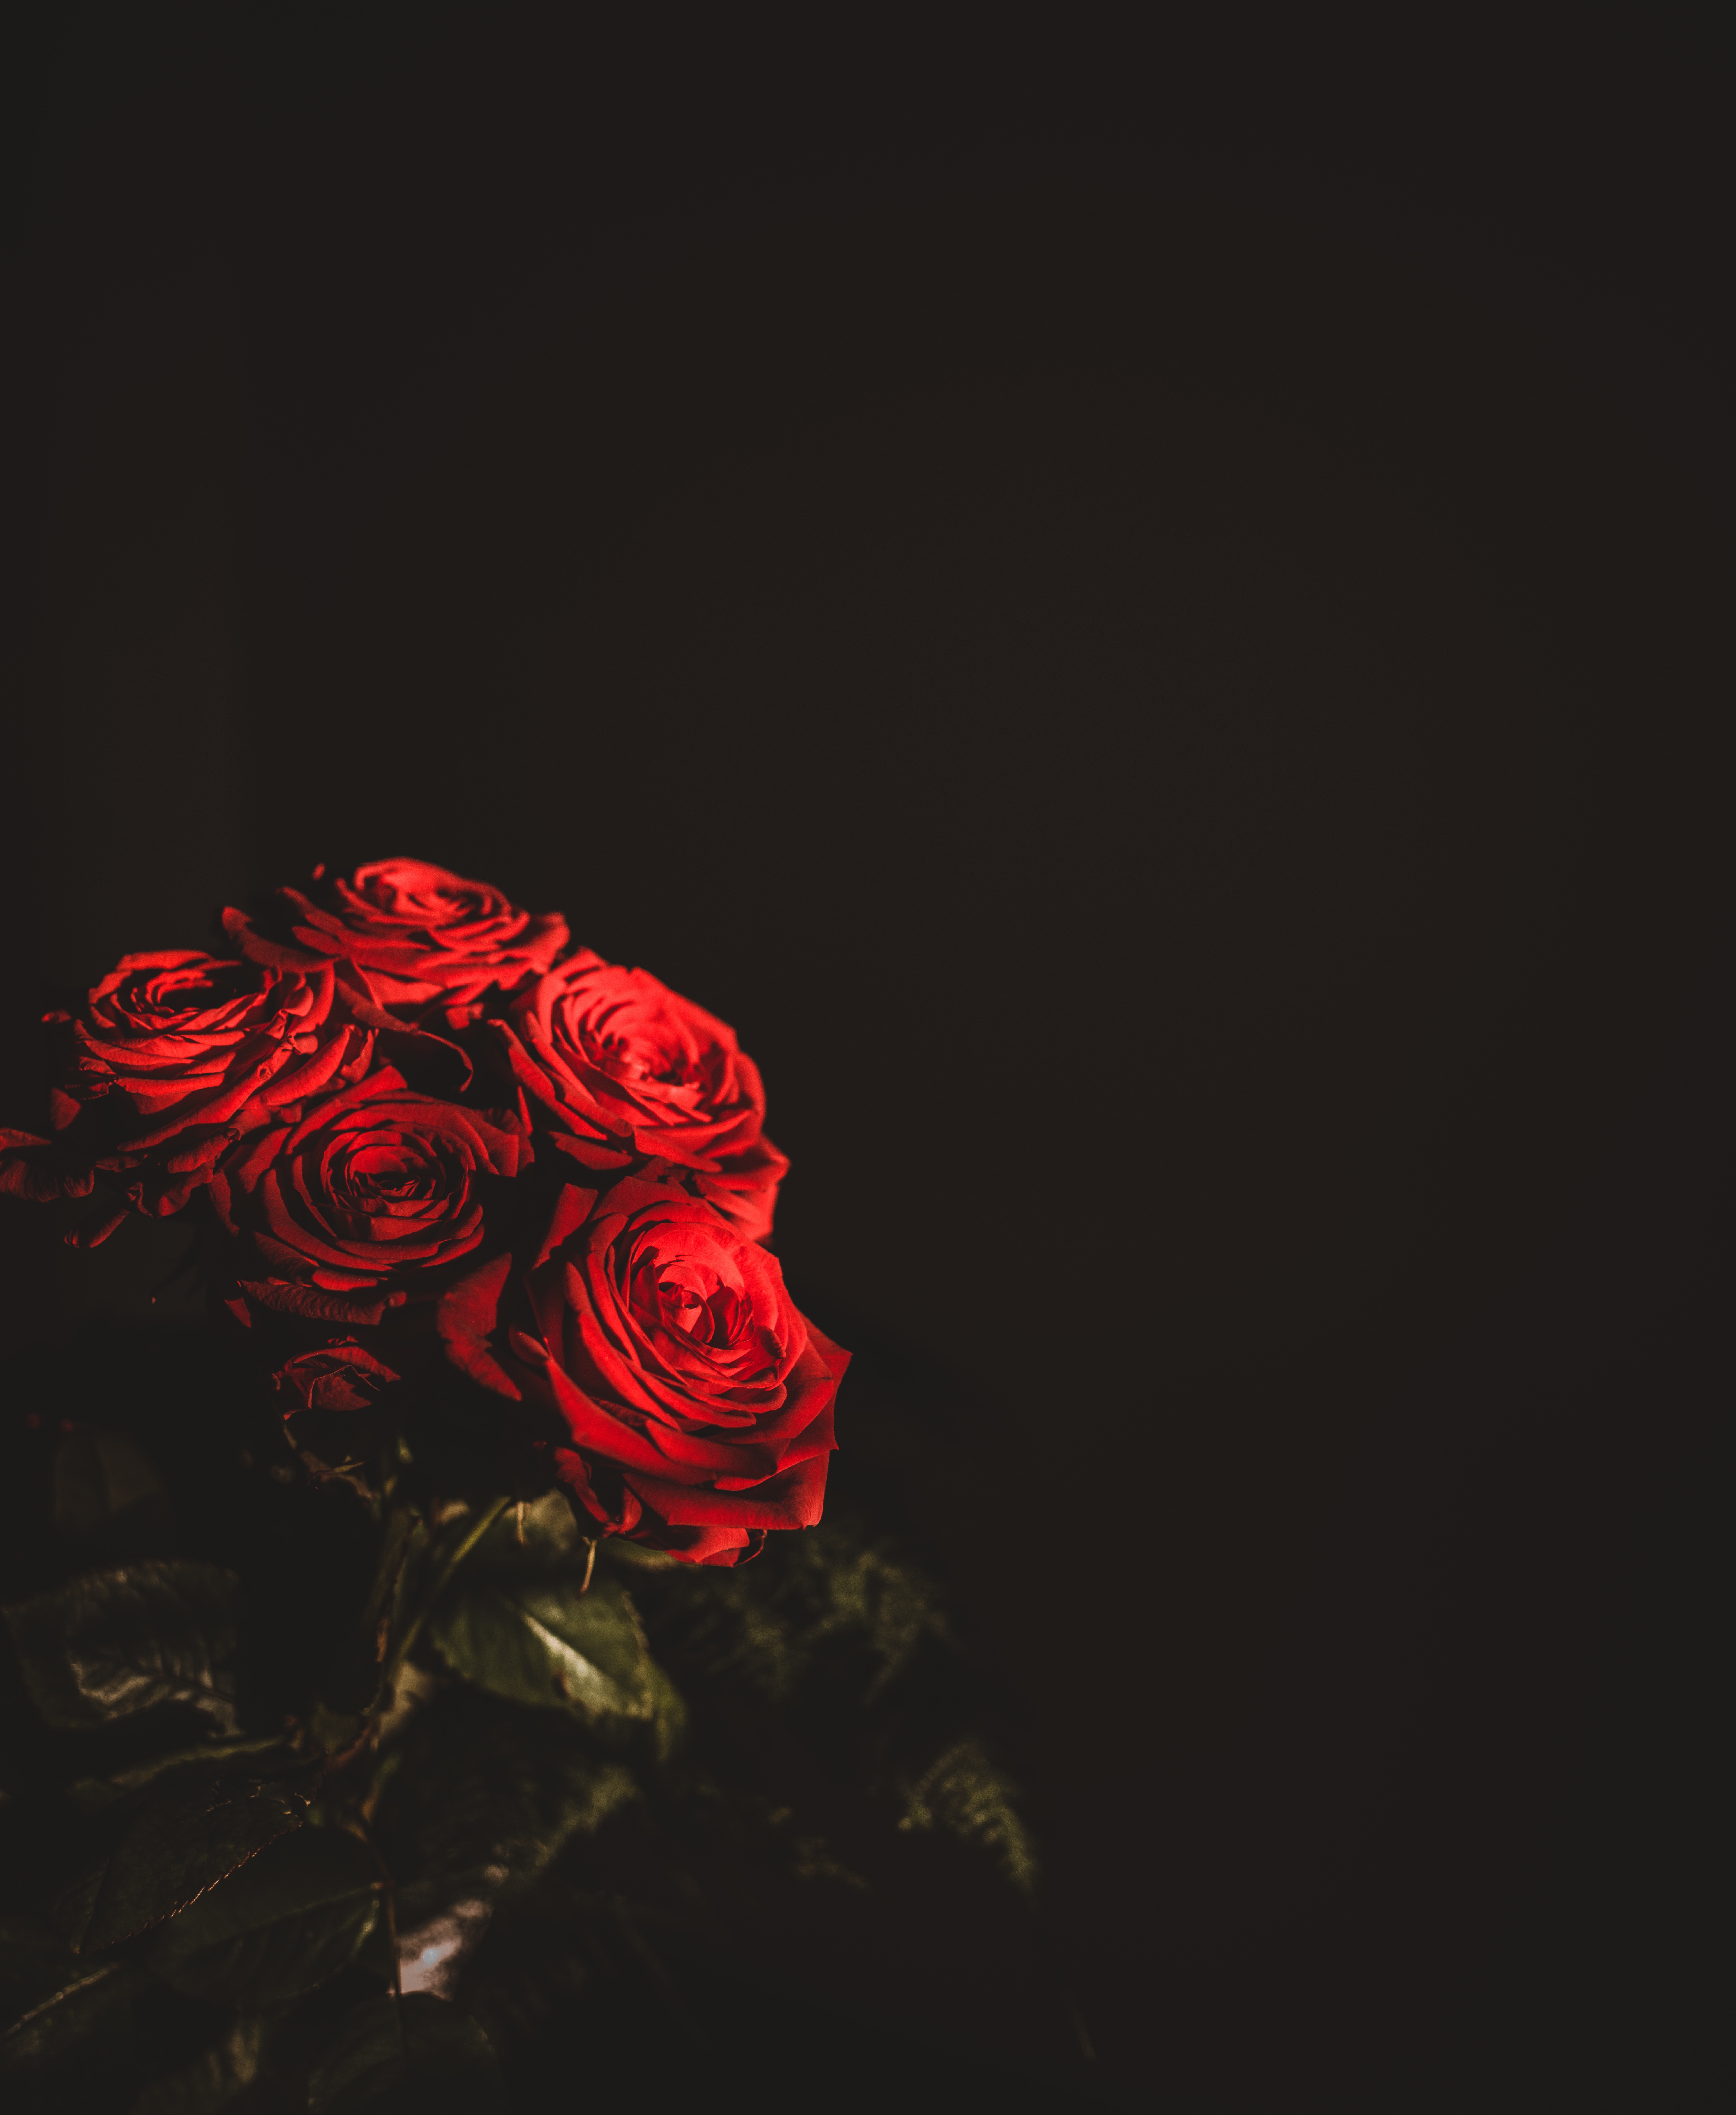 Wallpaper Red Rose in Black Background, Background - Download Free Image